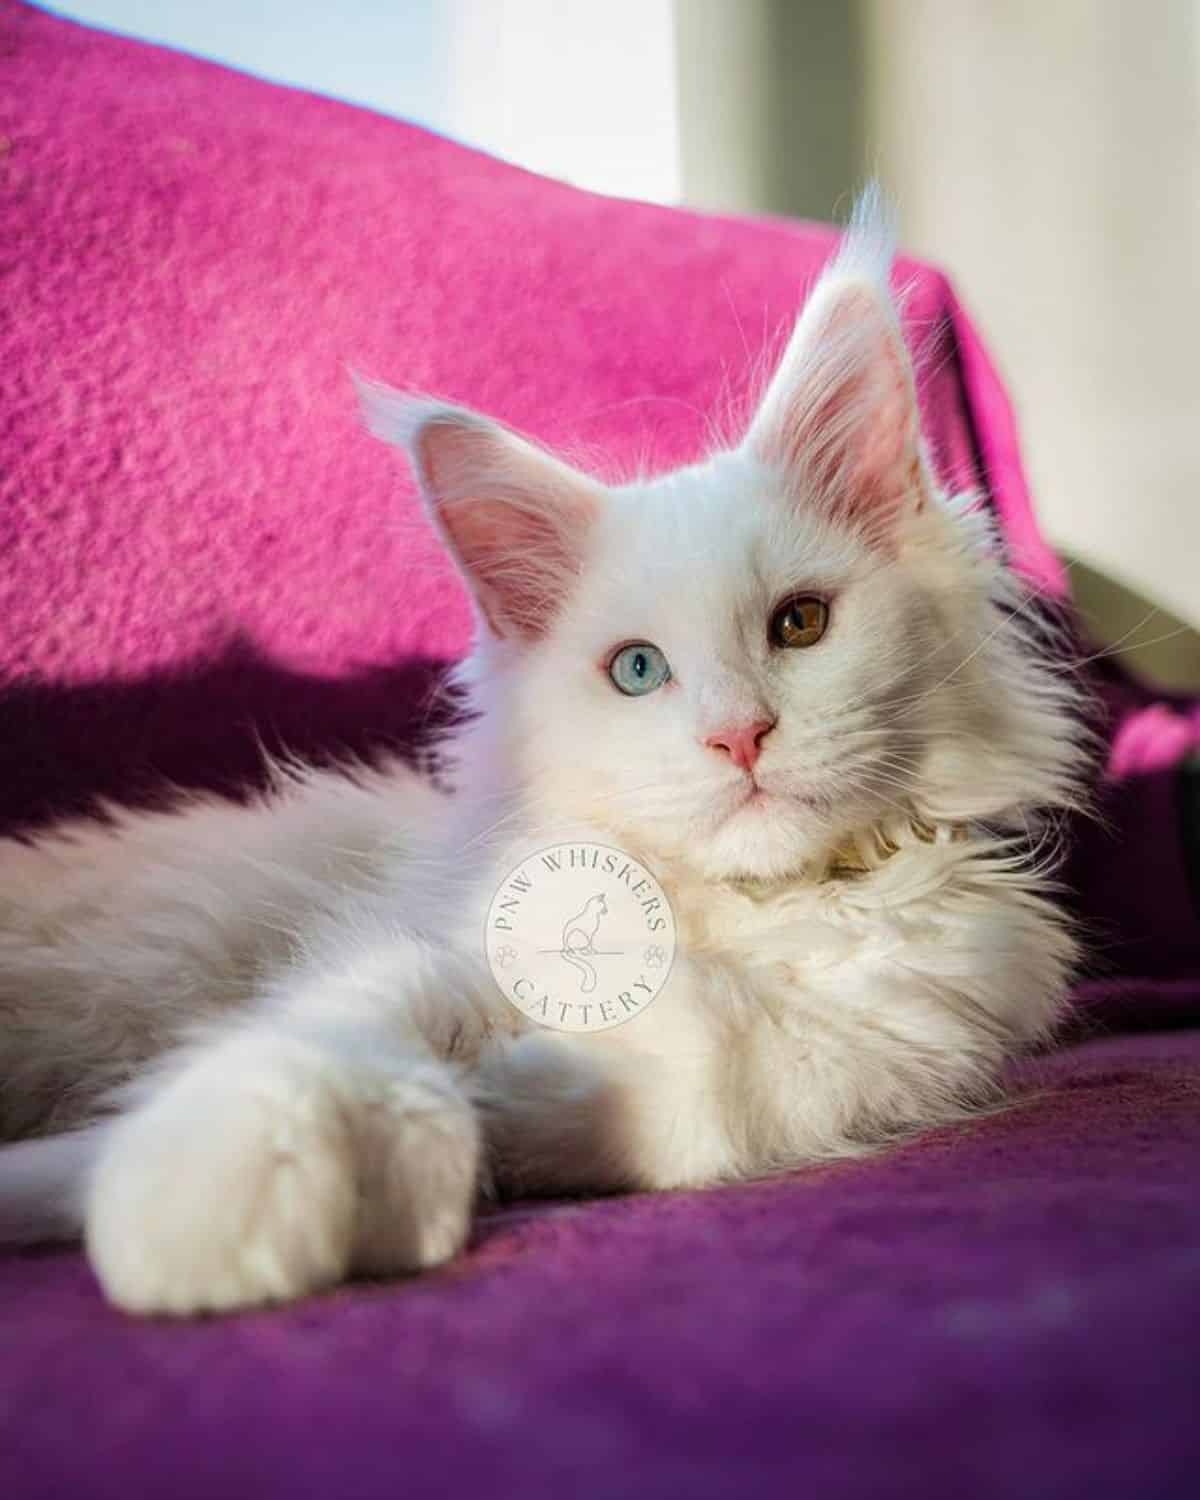 A fluffy white maine coon lying on a pin k blanket.